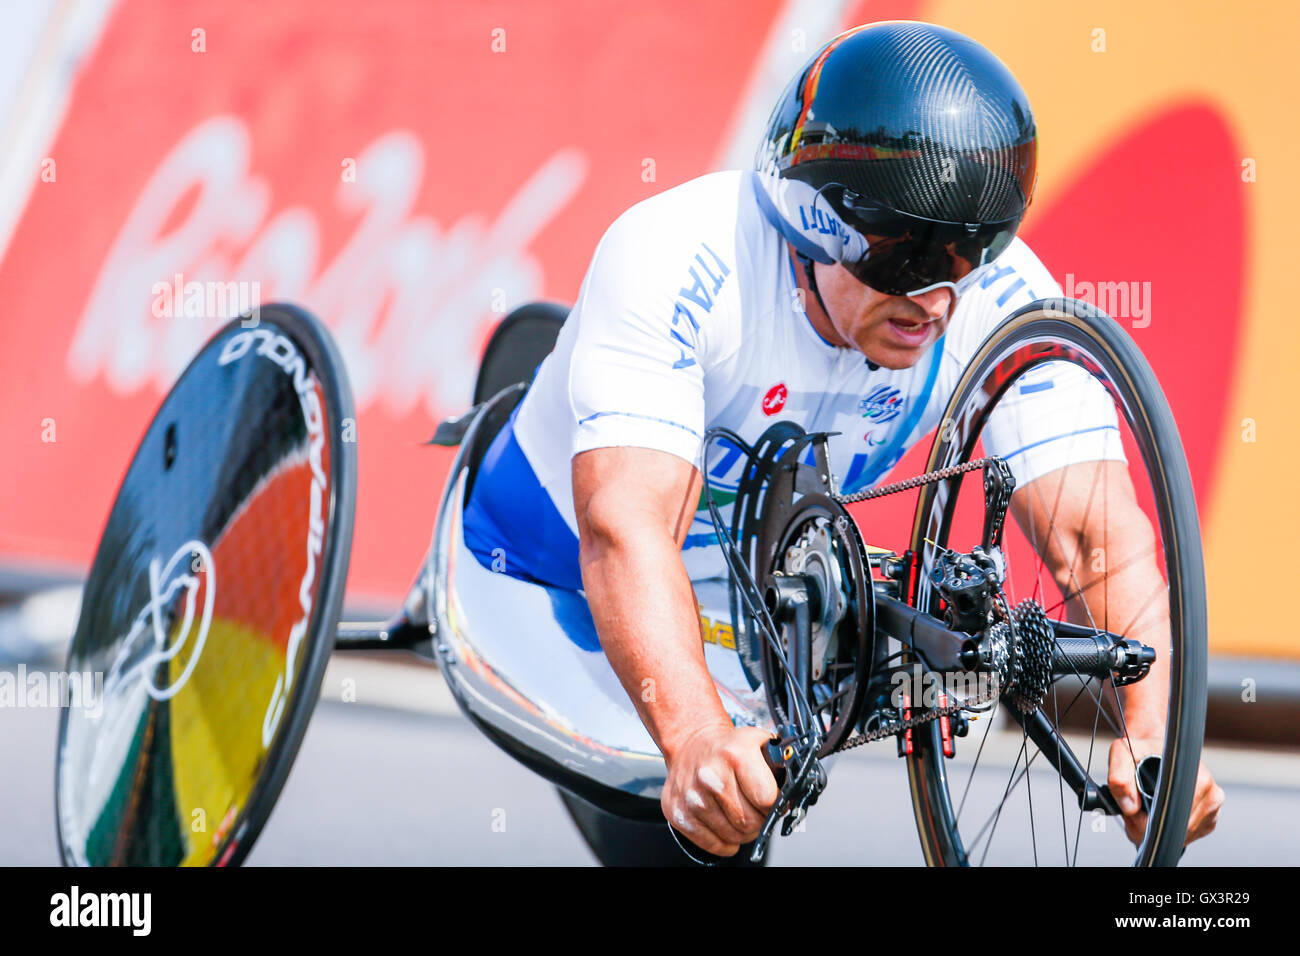 Rio De Janeiro, Brazil. 14th Sep, 2016. Alex Zanardi in action during the first day of para-cycling road in the time trial H5, Rio de Janeiro in Brazil. © Mauro Ujetto/Pacific Press/Alamy Live News Stock Photo